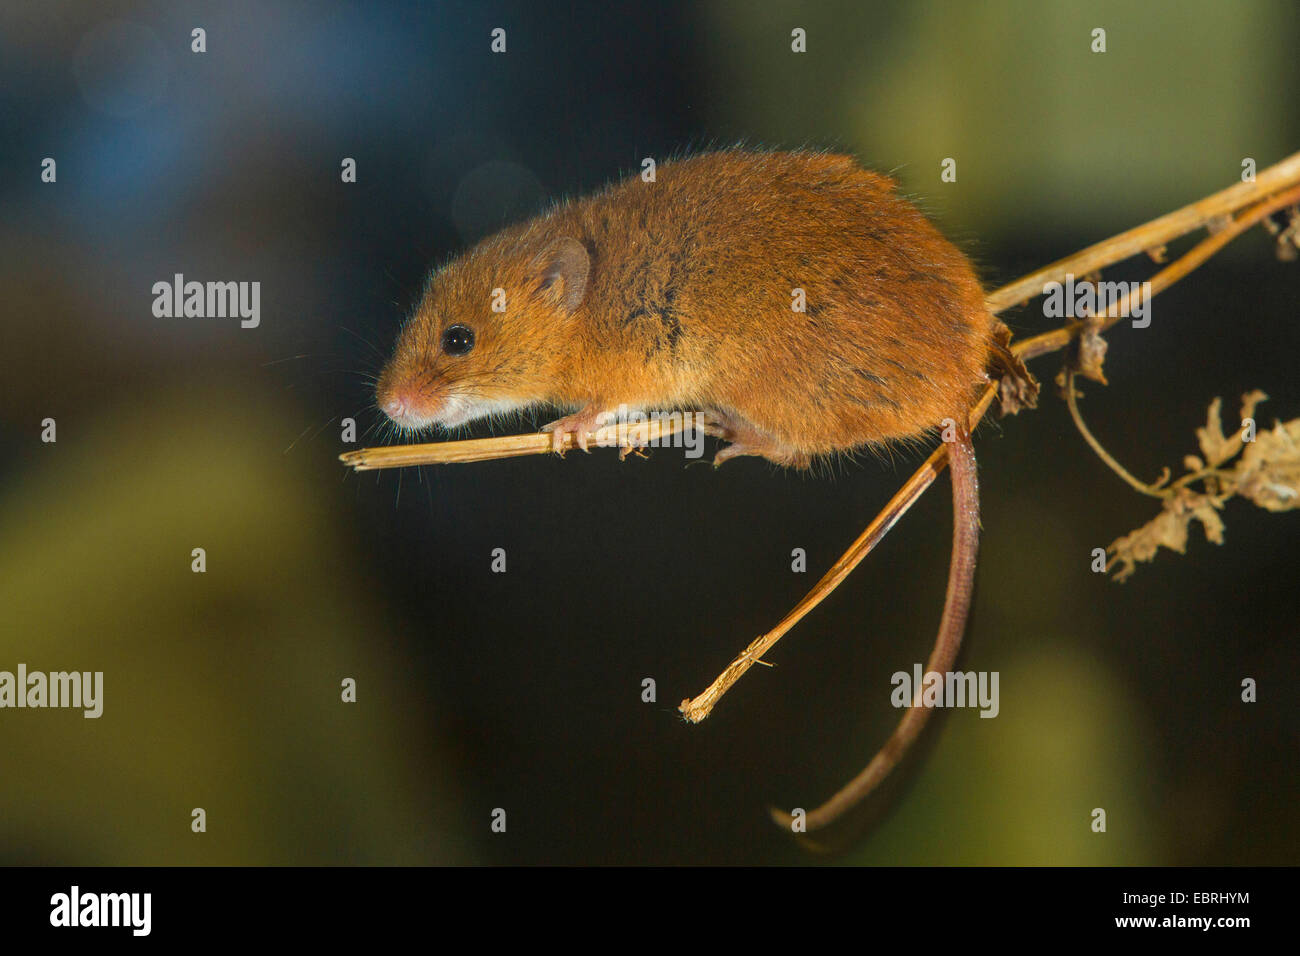 Old World harvest mouse (Micromys minutus), sitting on a dry leaf stalk Stock Photo